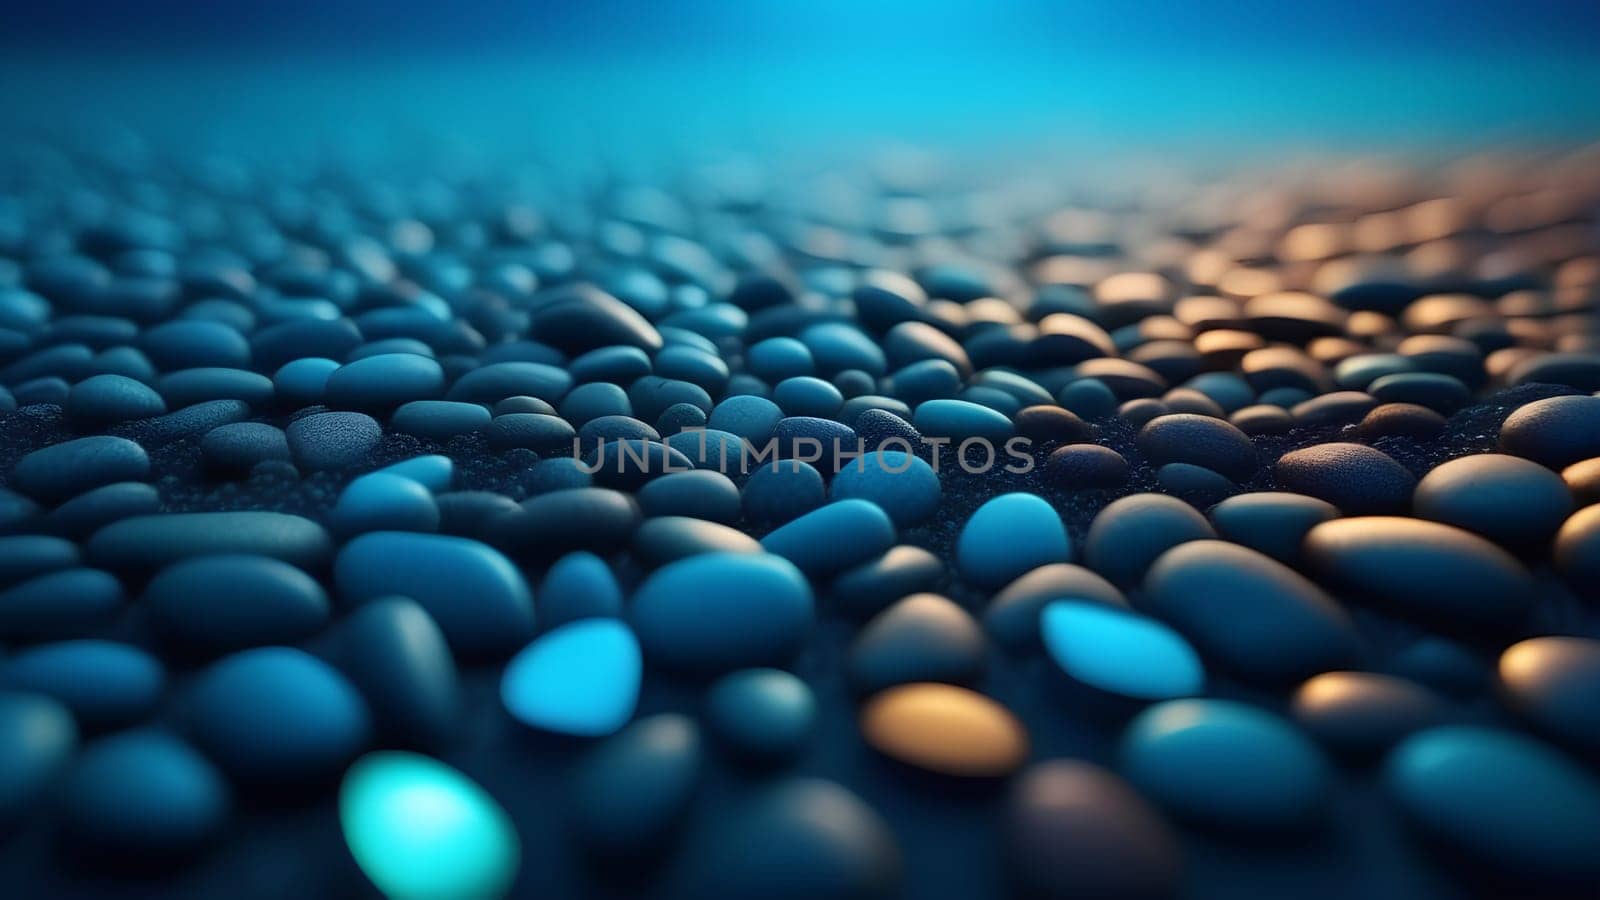 Calm background of small blue pebbles, abstract sea stones with natural texture in dark blue color, banner